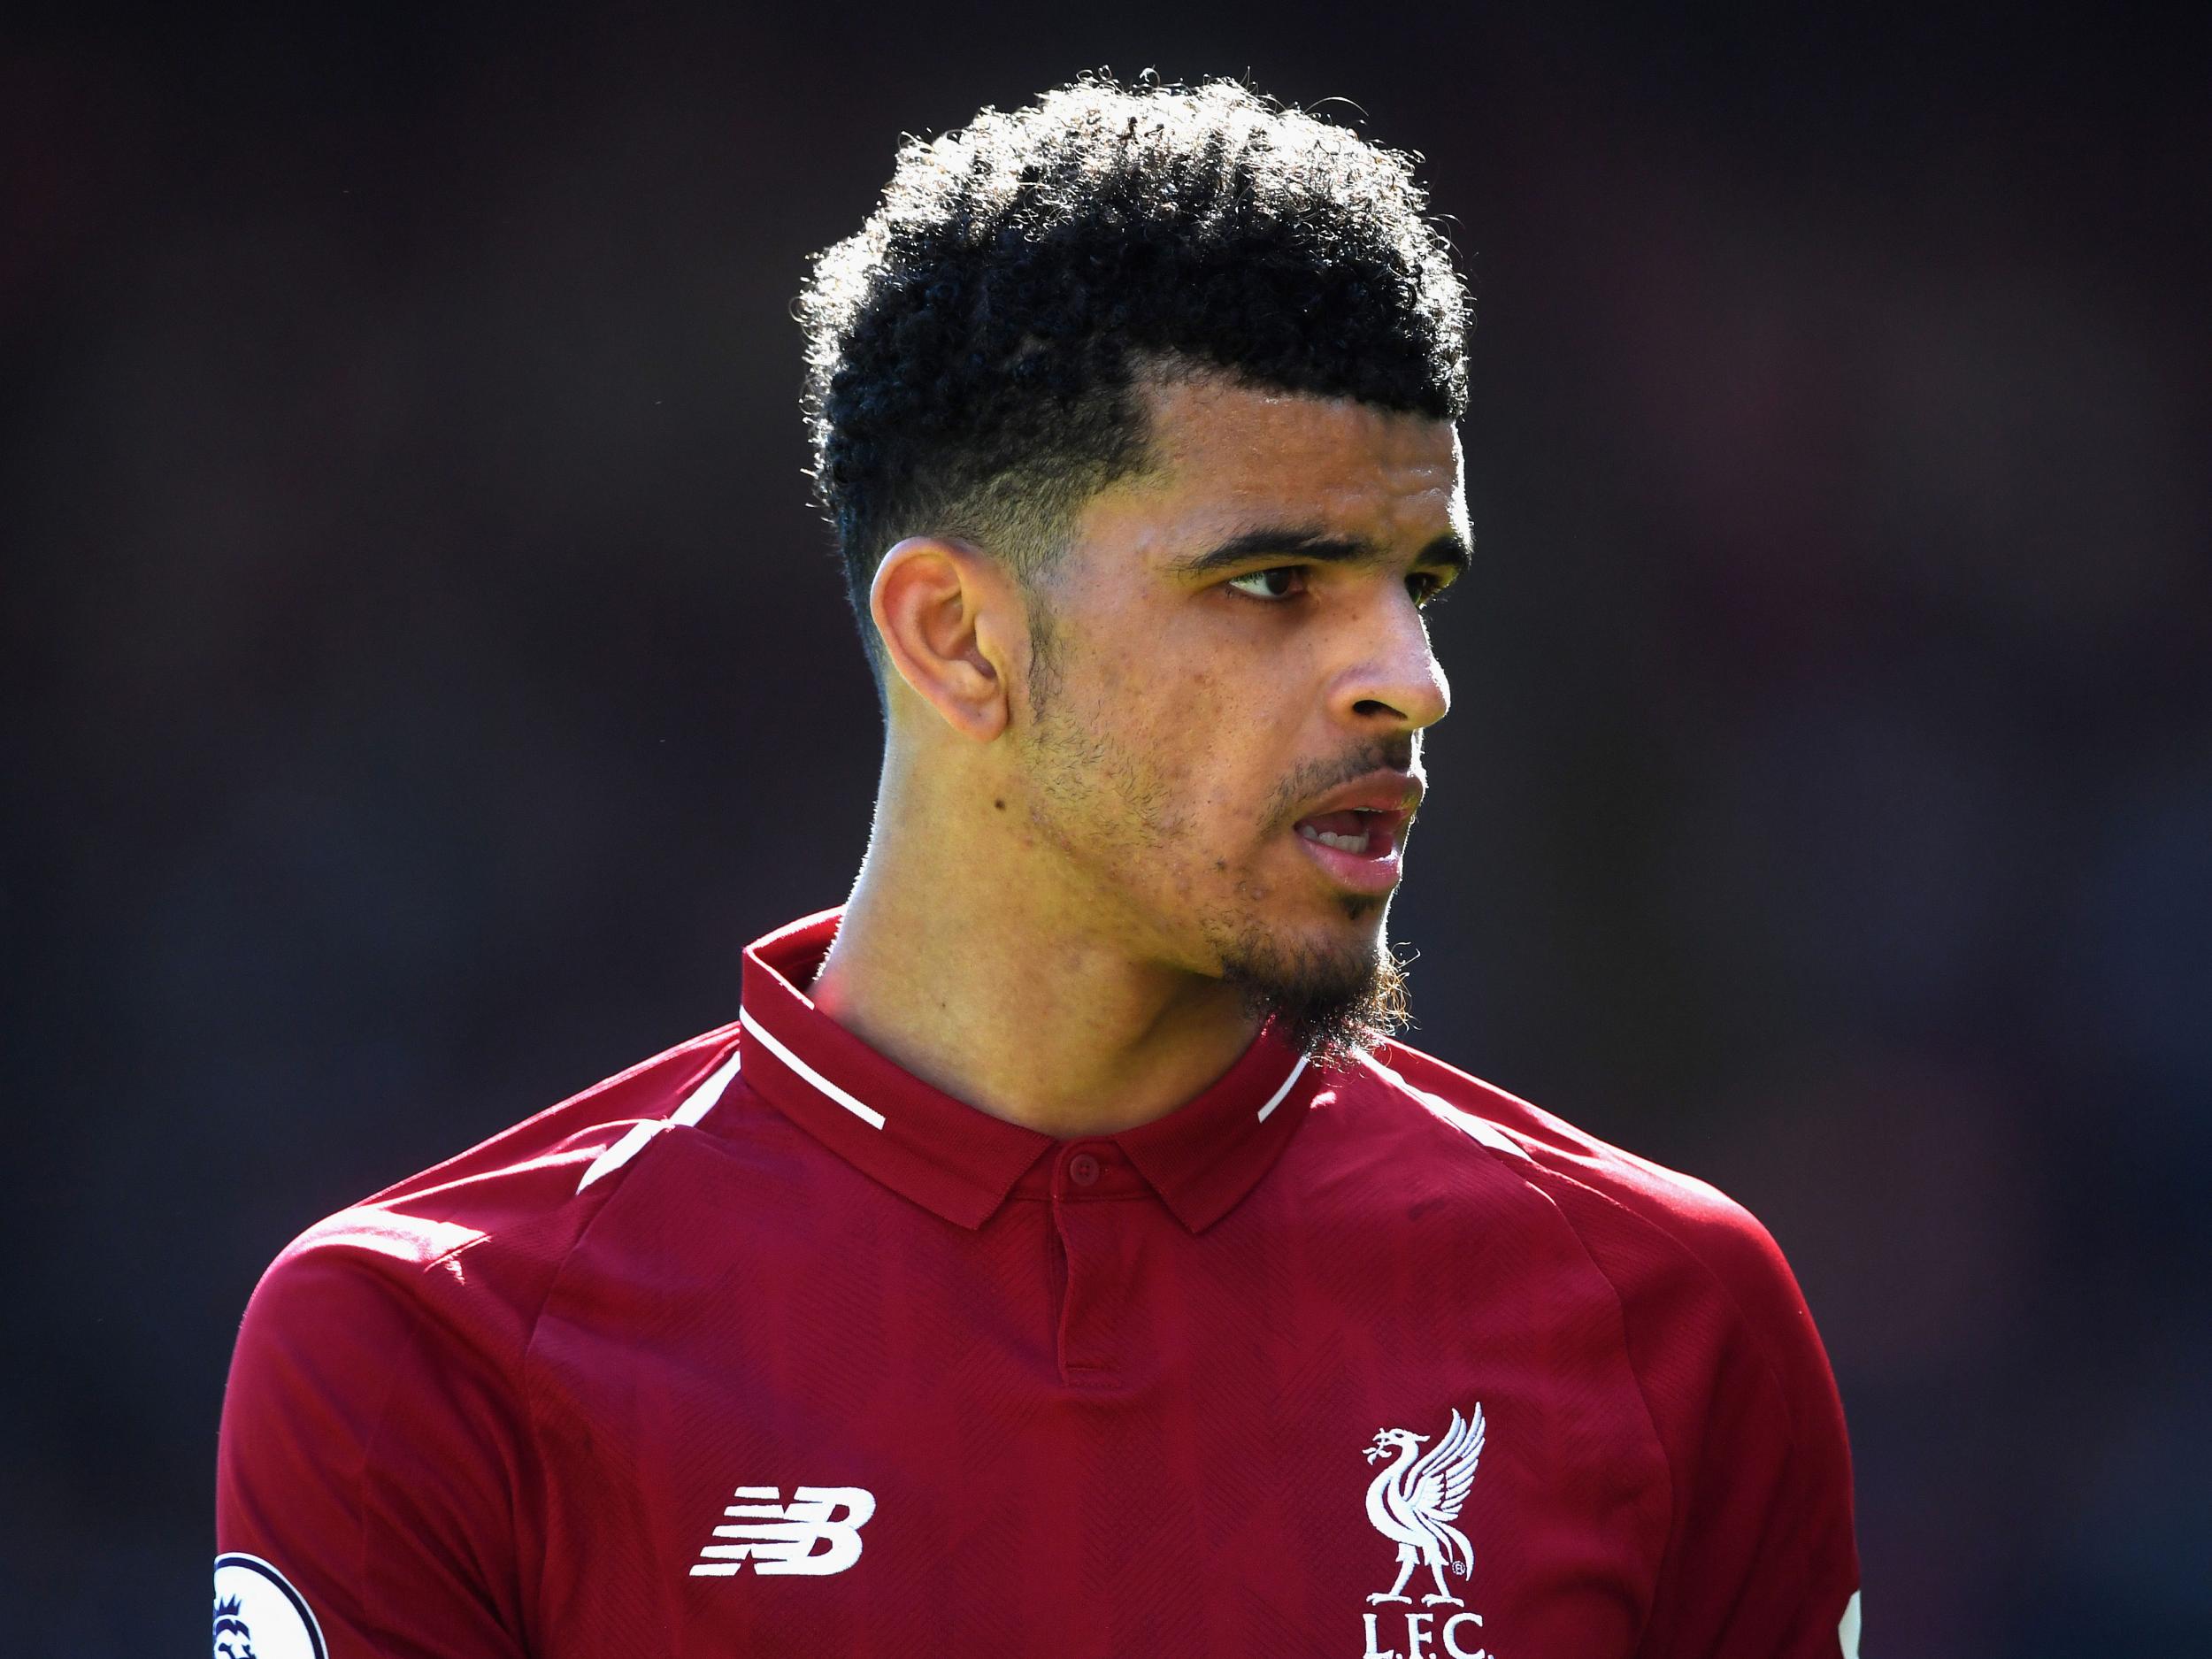 Dominic Solanke has played second fiddle to Liverpool's free-scoring frontline this season